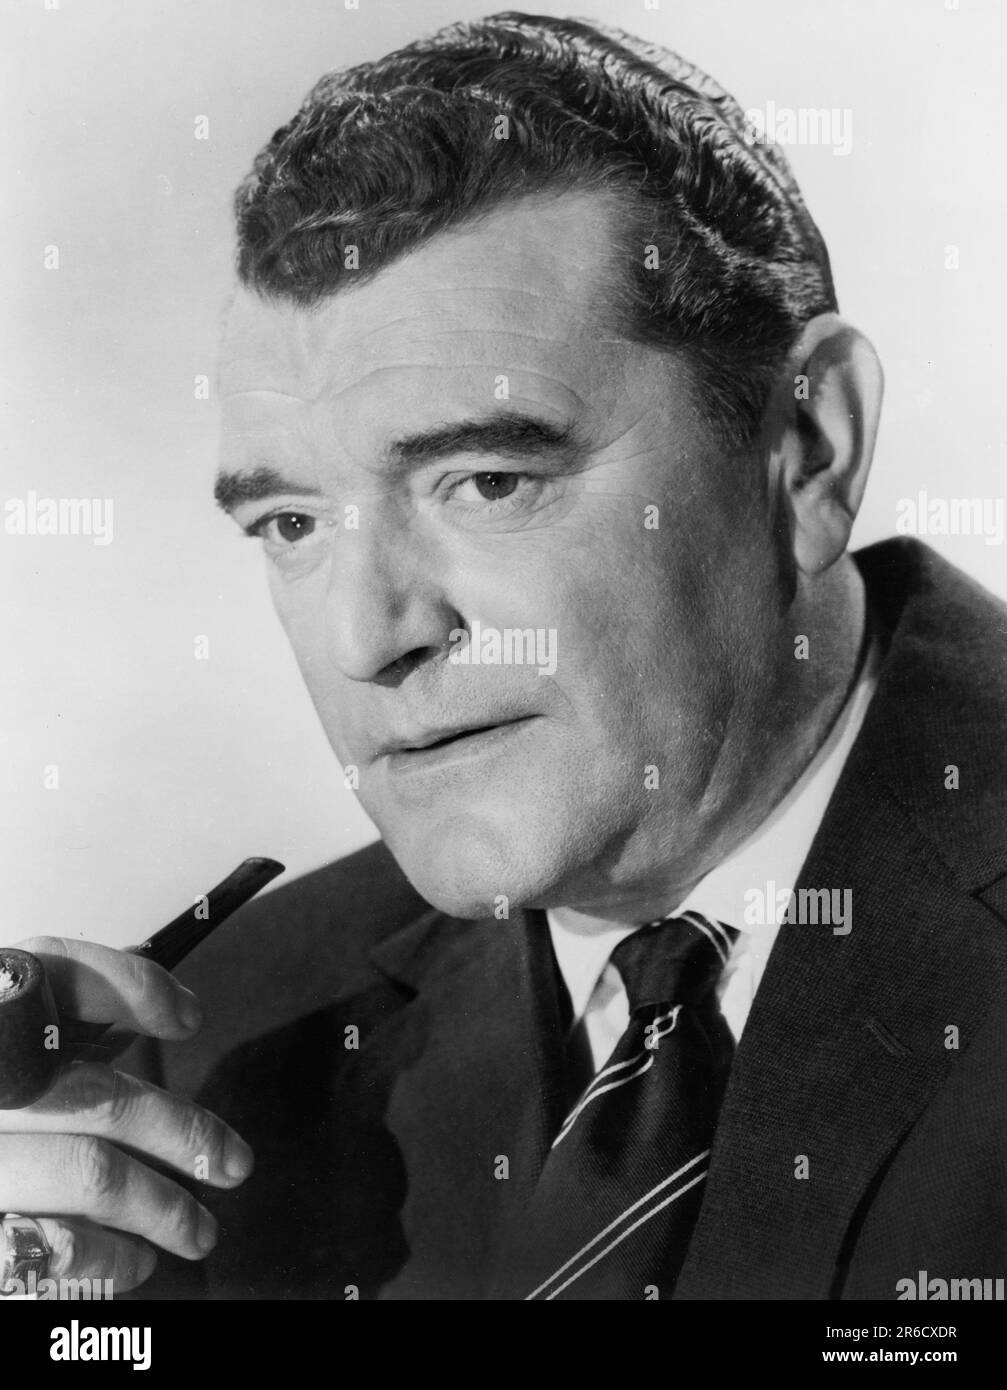 Jack Hawkins, head and shoulders Publicity Portrait for the British-American Film, 'Fortune Is a Woman', U.S. title: 'She Played With Fire', Columbia Pictures, 1957 Stock Photo